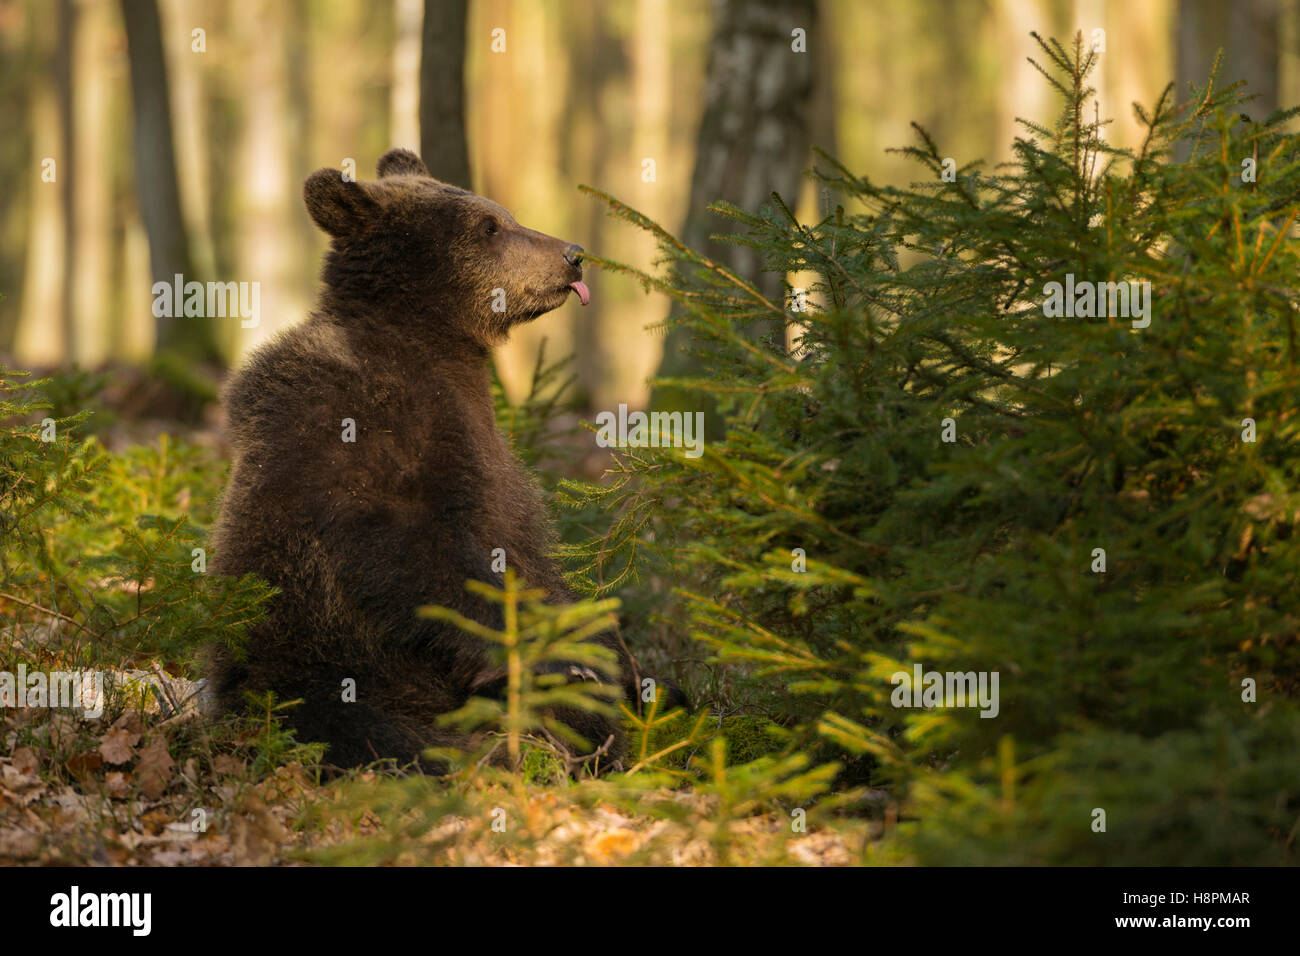 Eurasian Brown Bear / Europaeischer Braunbaer ( Ursus arctos ) young cub, sitting on the ground, sticking its tongue out, funny. Stock Photo